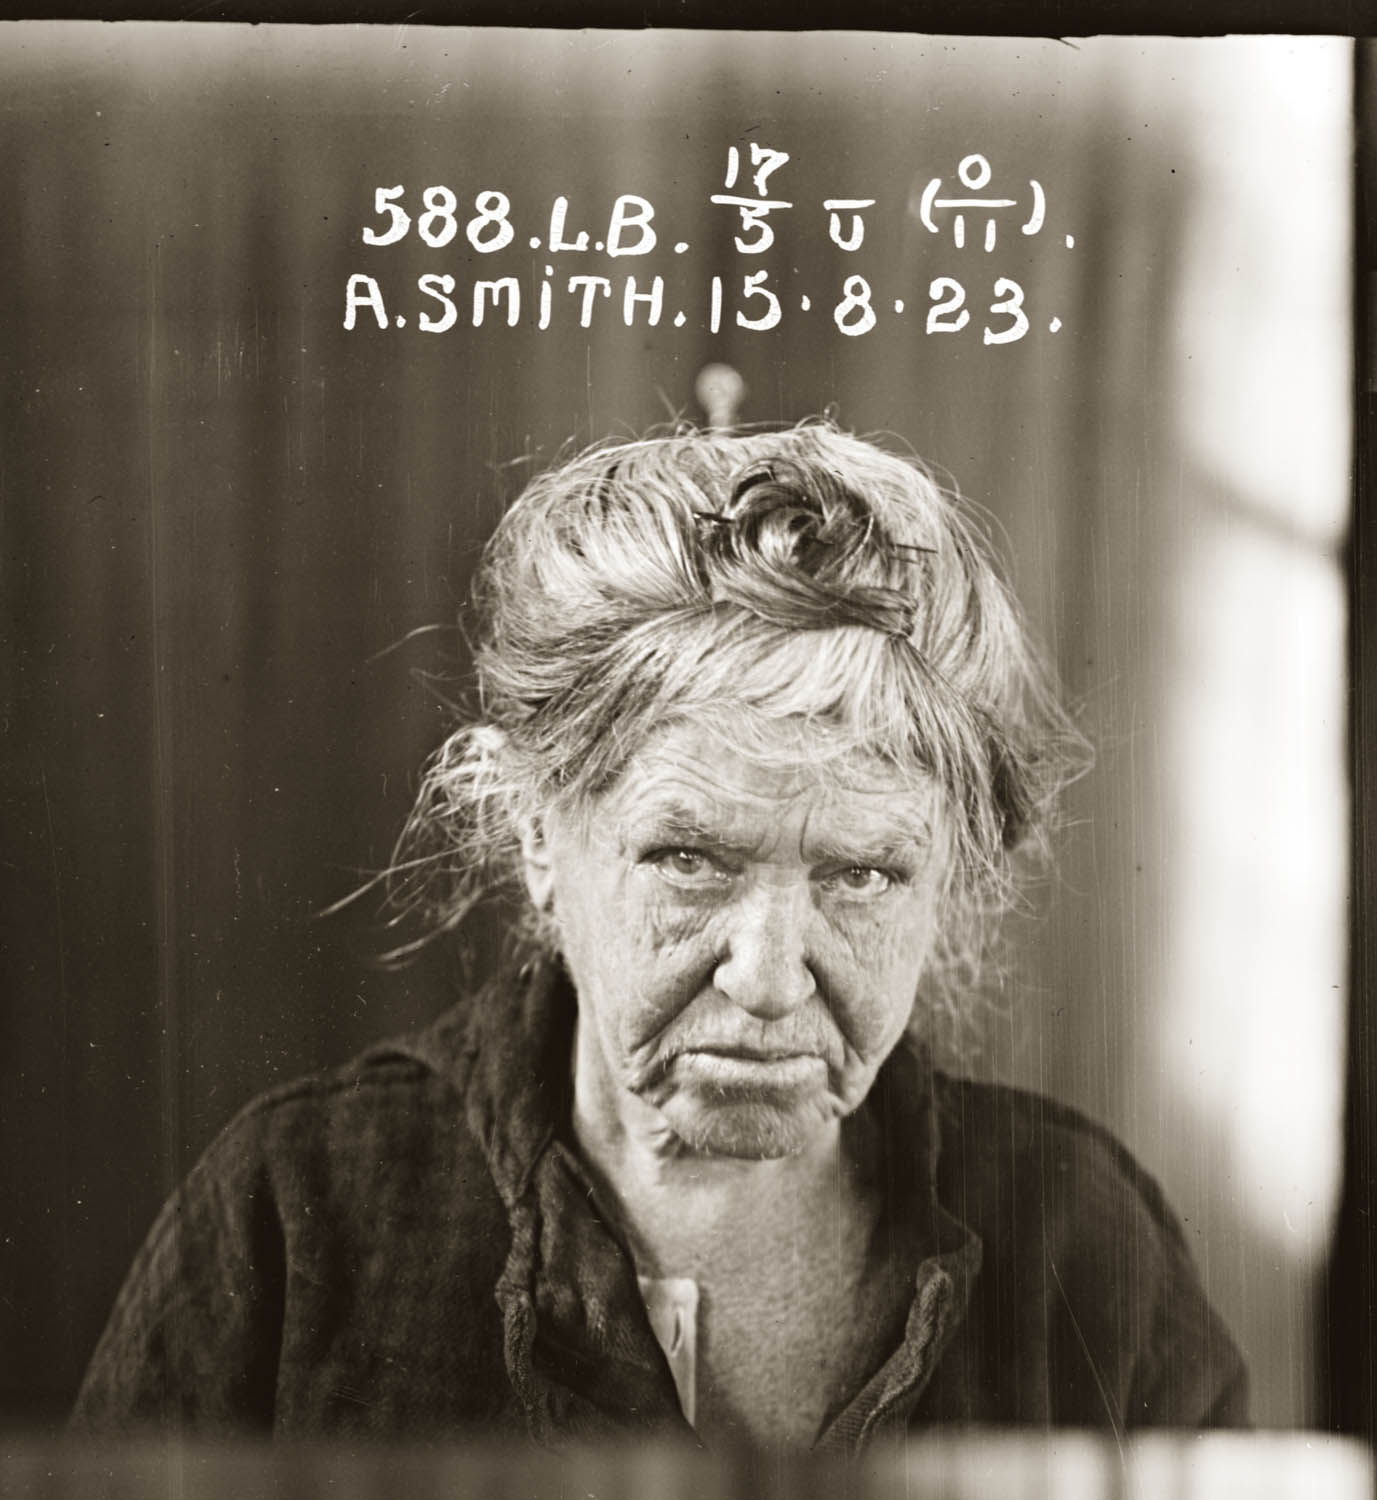 Mugshot of 588 Agnes Smith taken 15 August 1923. Three views: face, profile, full length.